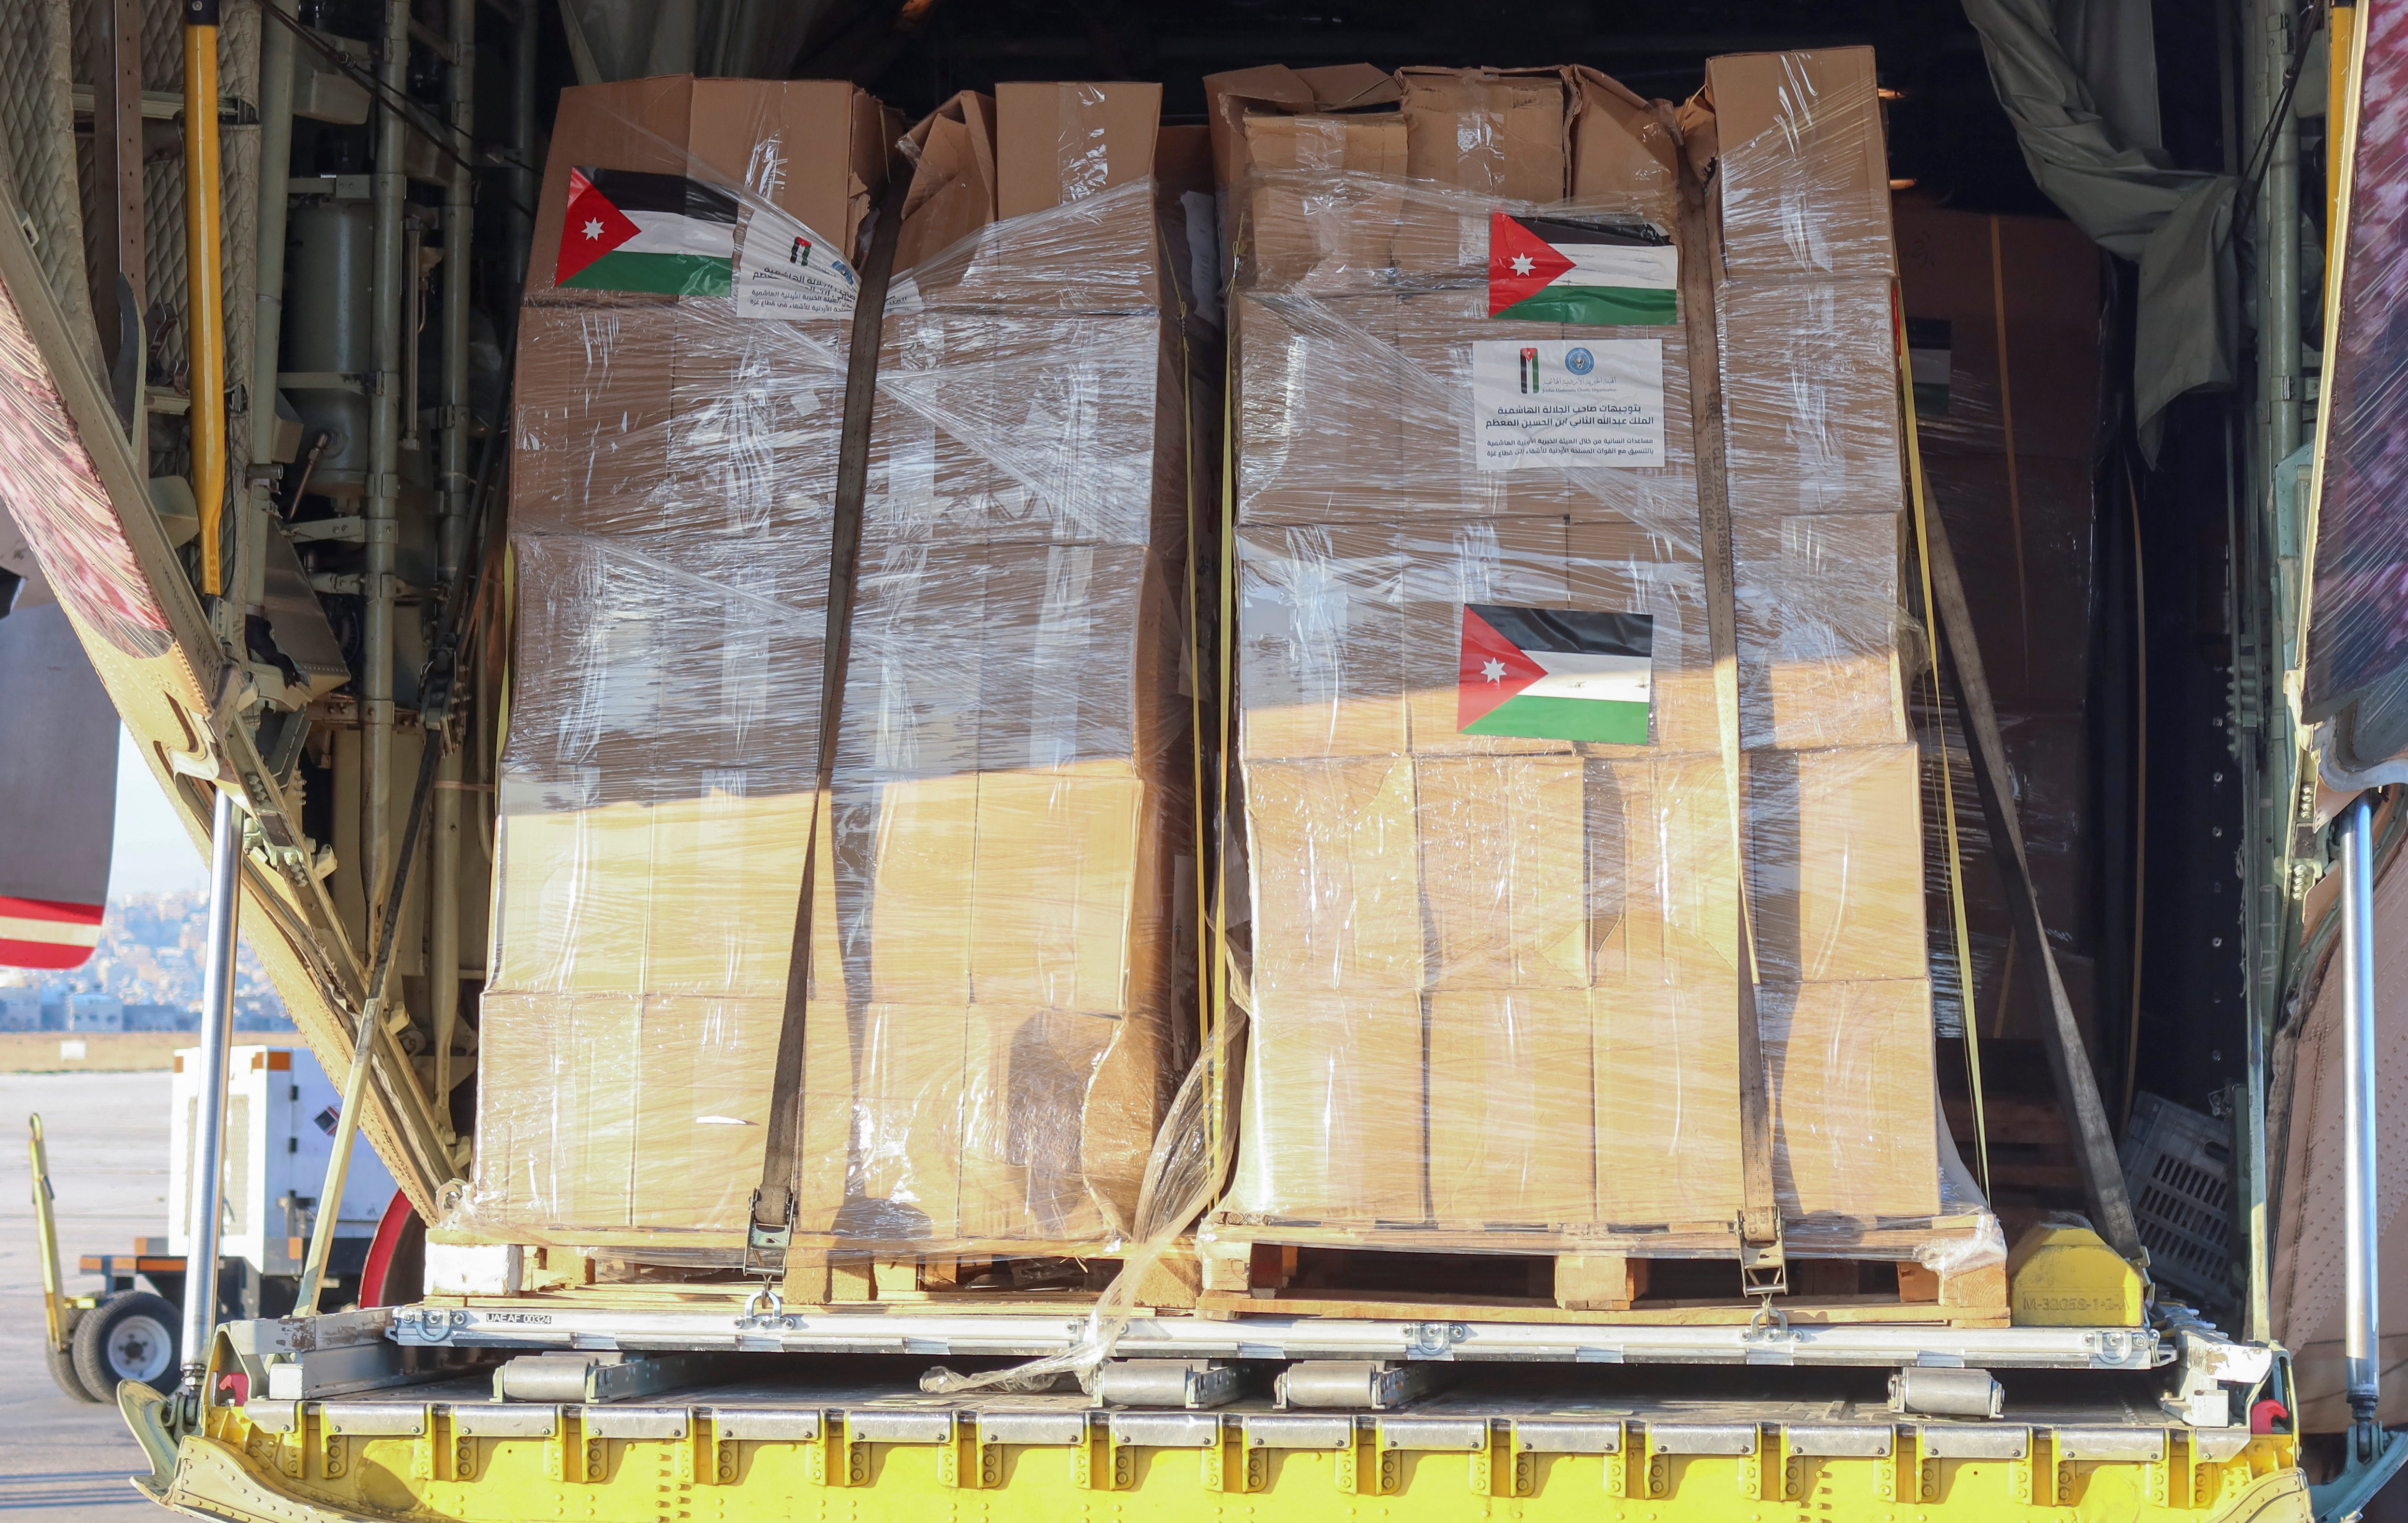 Humanitarian aid from Jordan Hashemite Charity Organization destined for the Gaza Strip is loaded inside a plane in Amman